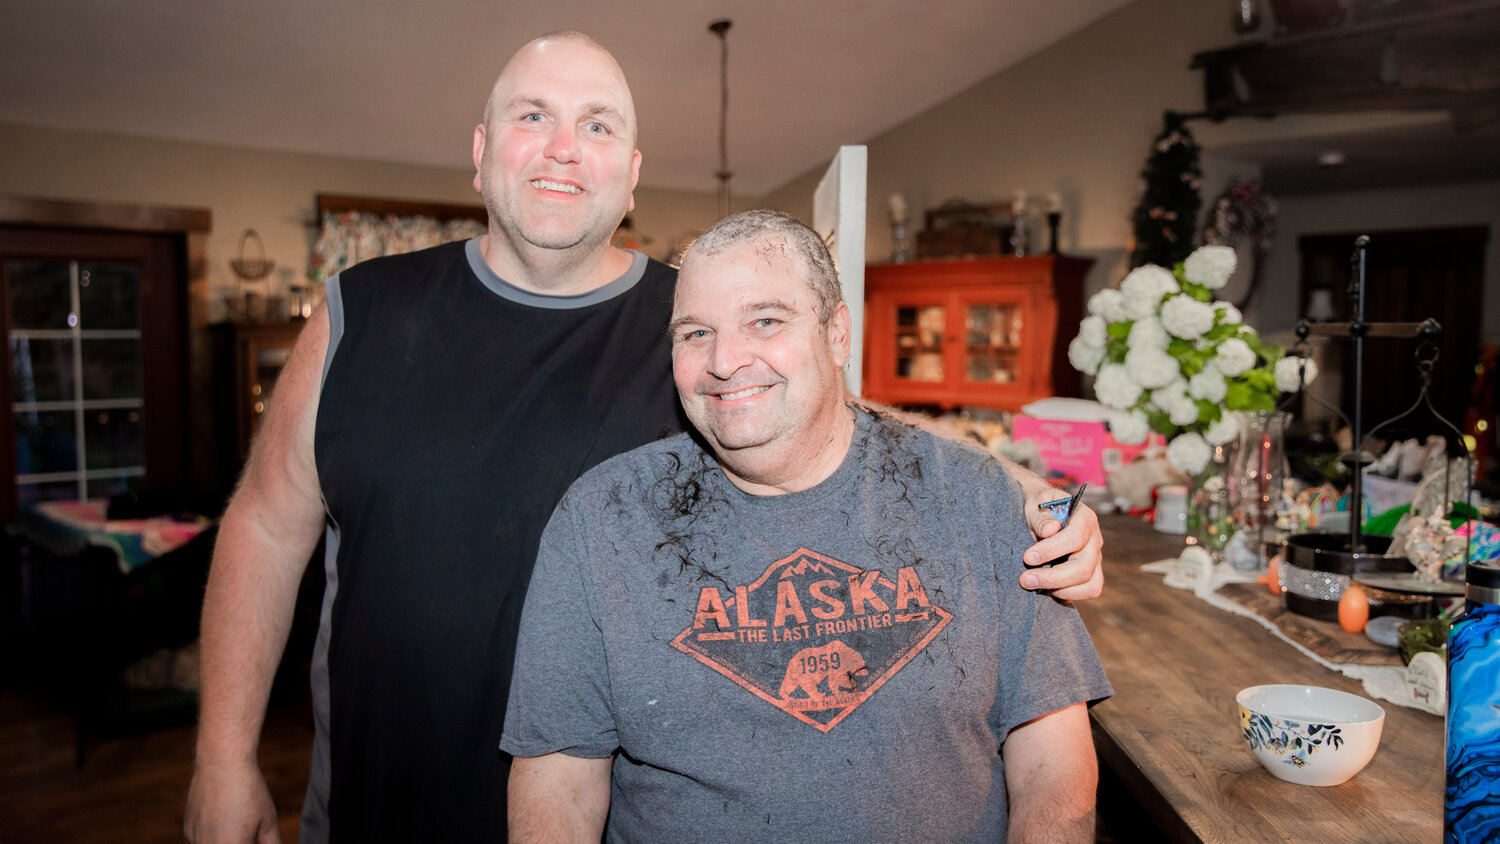 Ken Wiseman, right, smiles for a photo alongside Ty Vlach after they cut their hair to raise awareness for Tonja Vlach, a receptionist at I-5 Toyota, who is undergoing chemotherapy for breast cancer and an auction the family is holding online to raise funds this weekend.